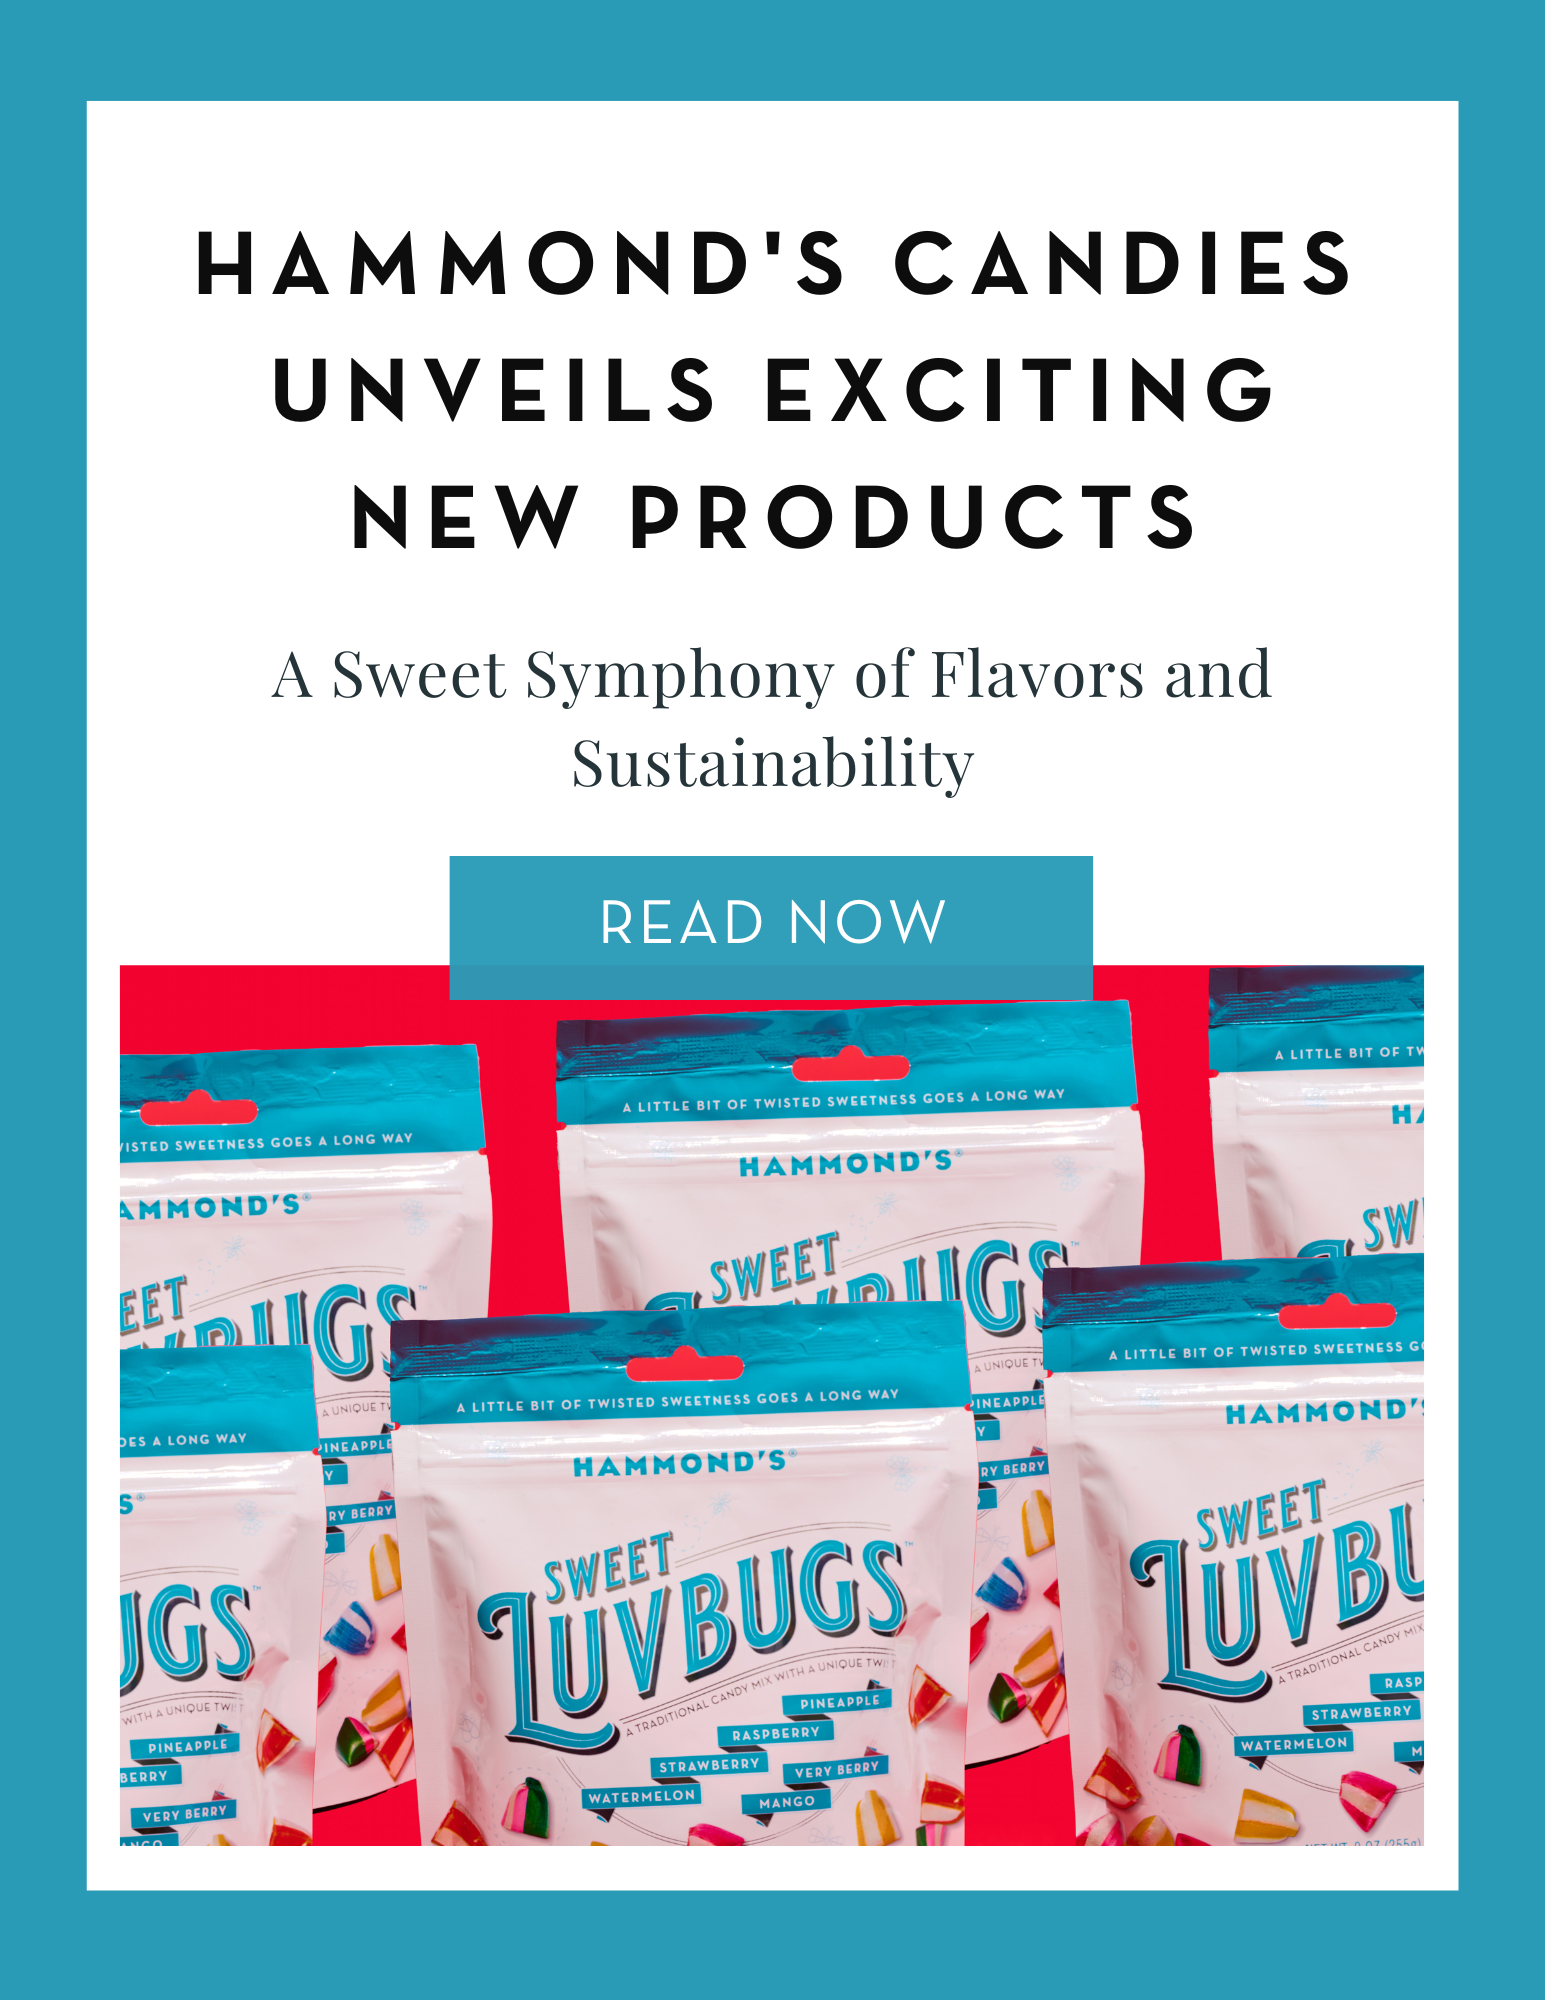 Hammond's Candies Unveils Exciting New Products - A Sweet Symphony of Flavors and Sustainability